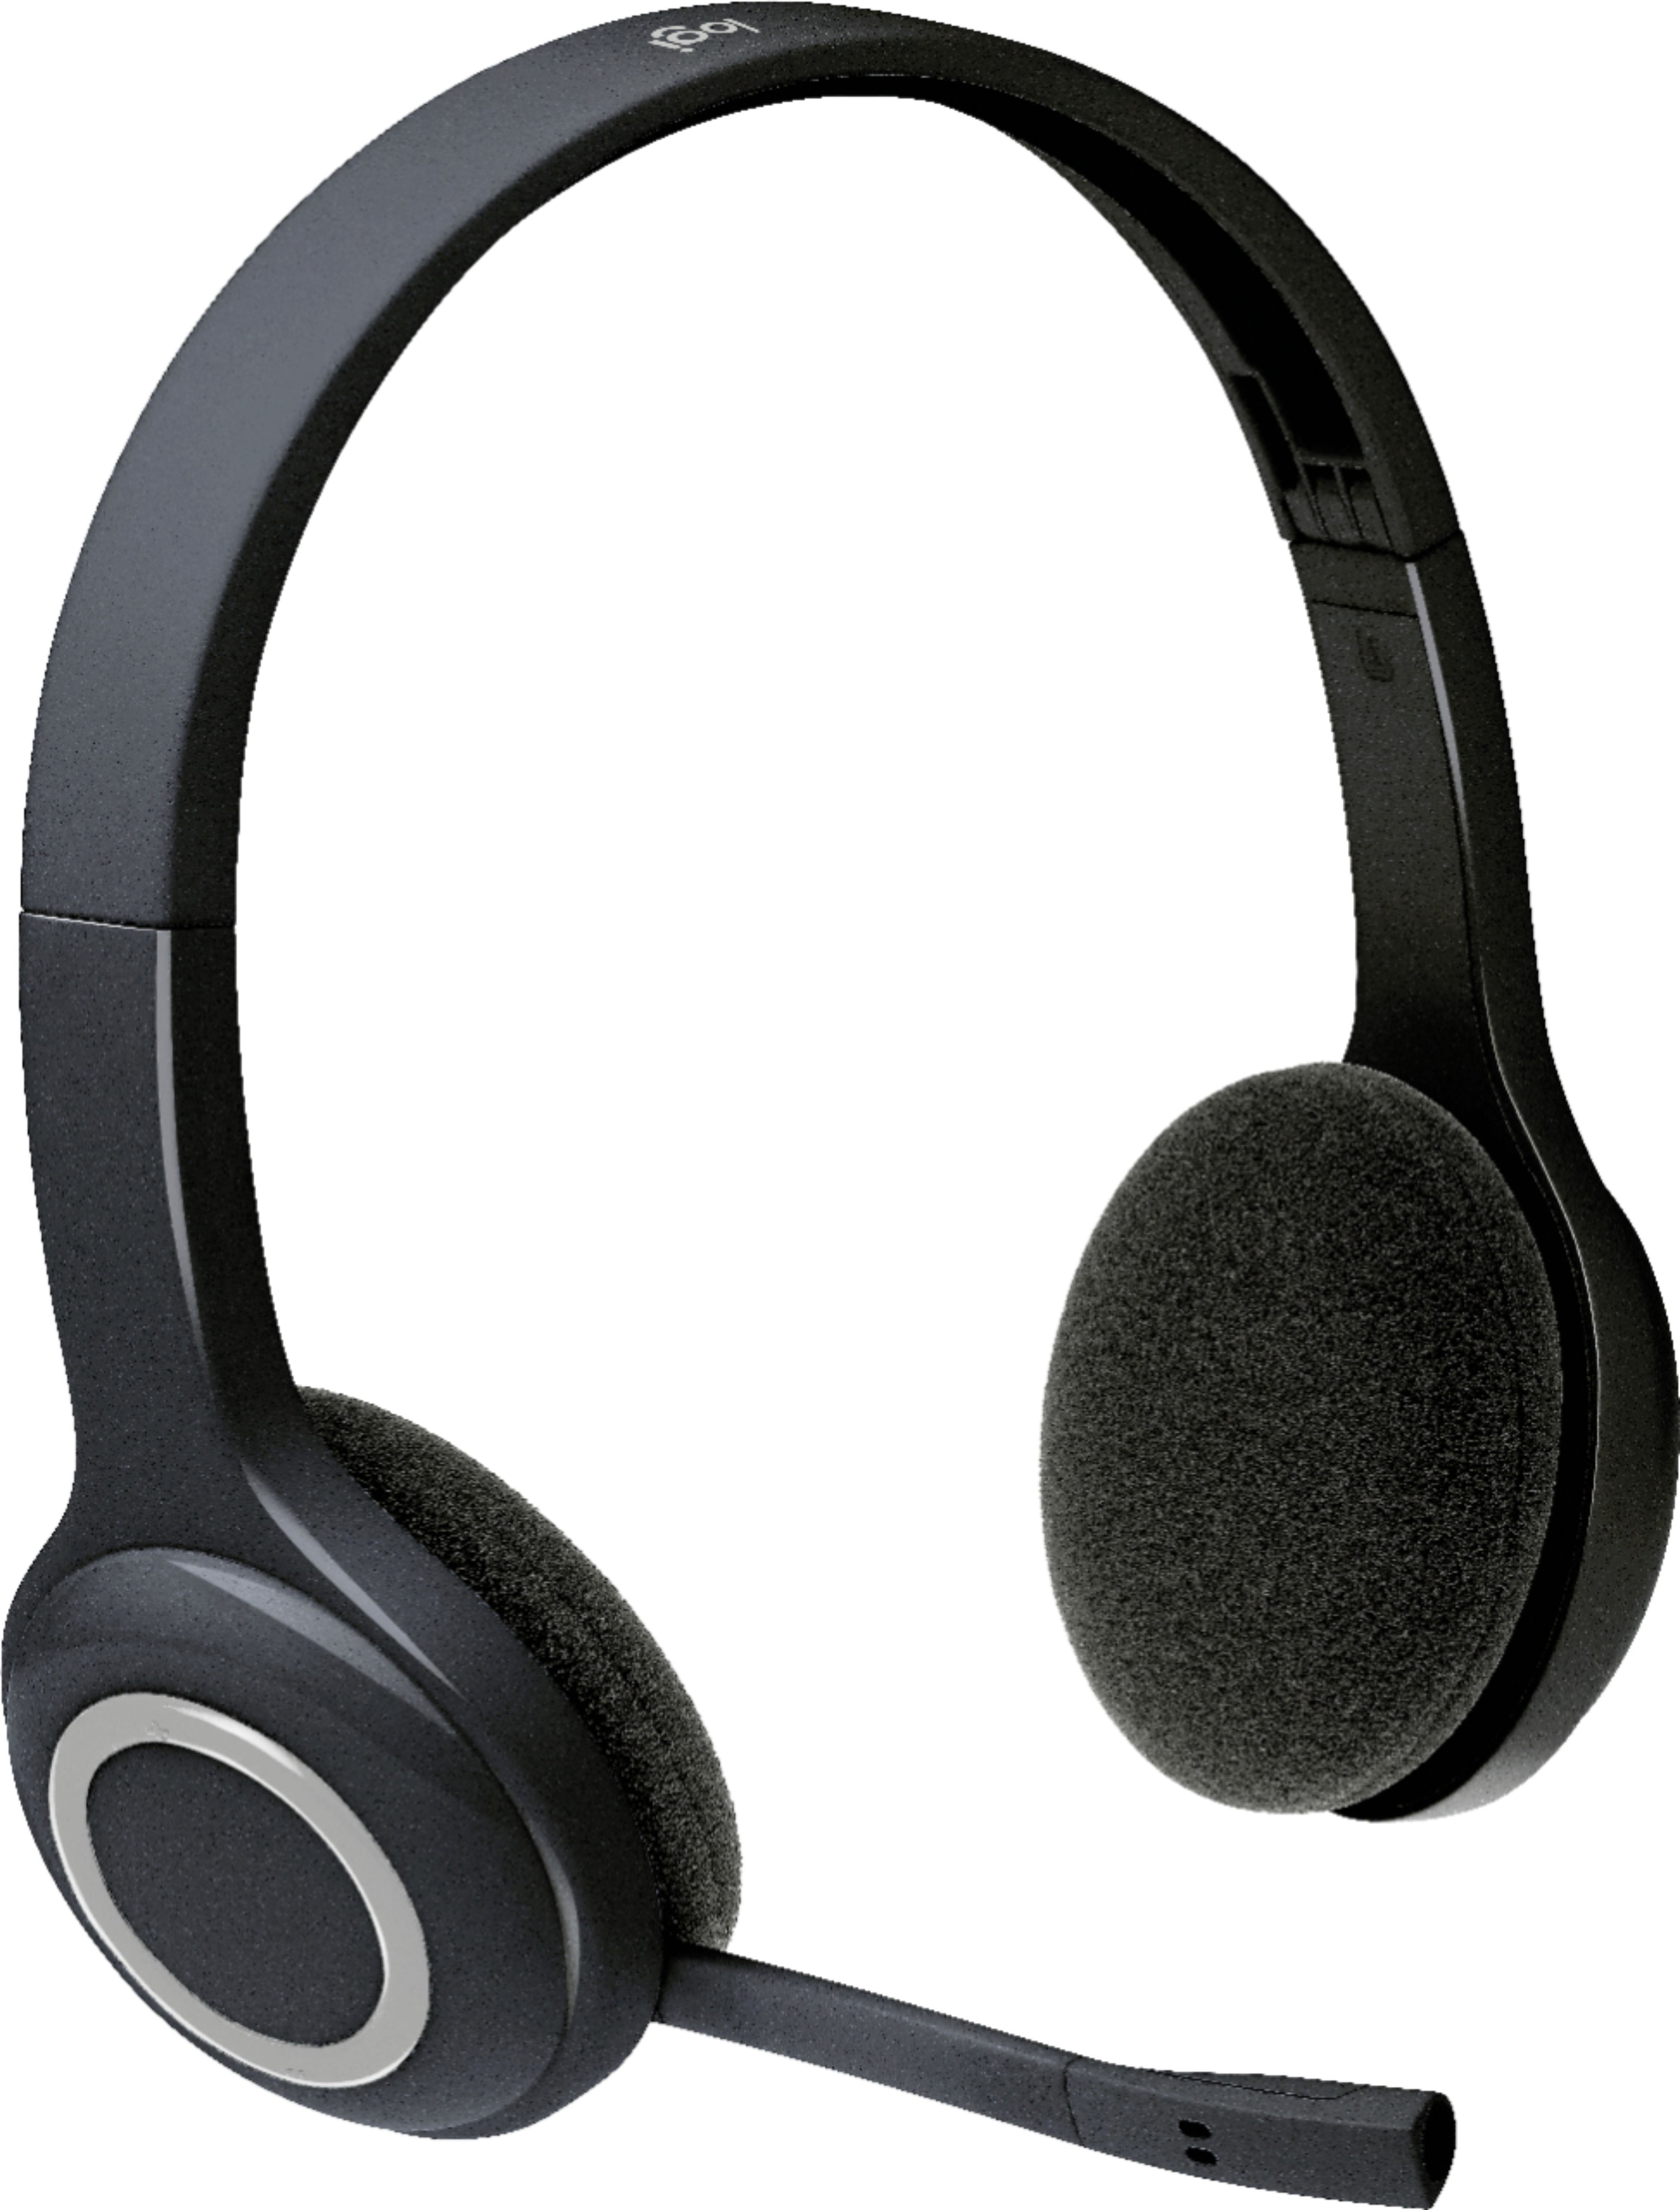 Angle View: Logitech - Zone 900 Wireless Bluetooth Noise Canceling On-Ear Headset - Graphite